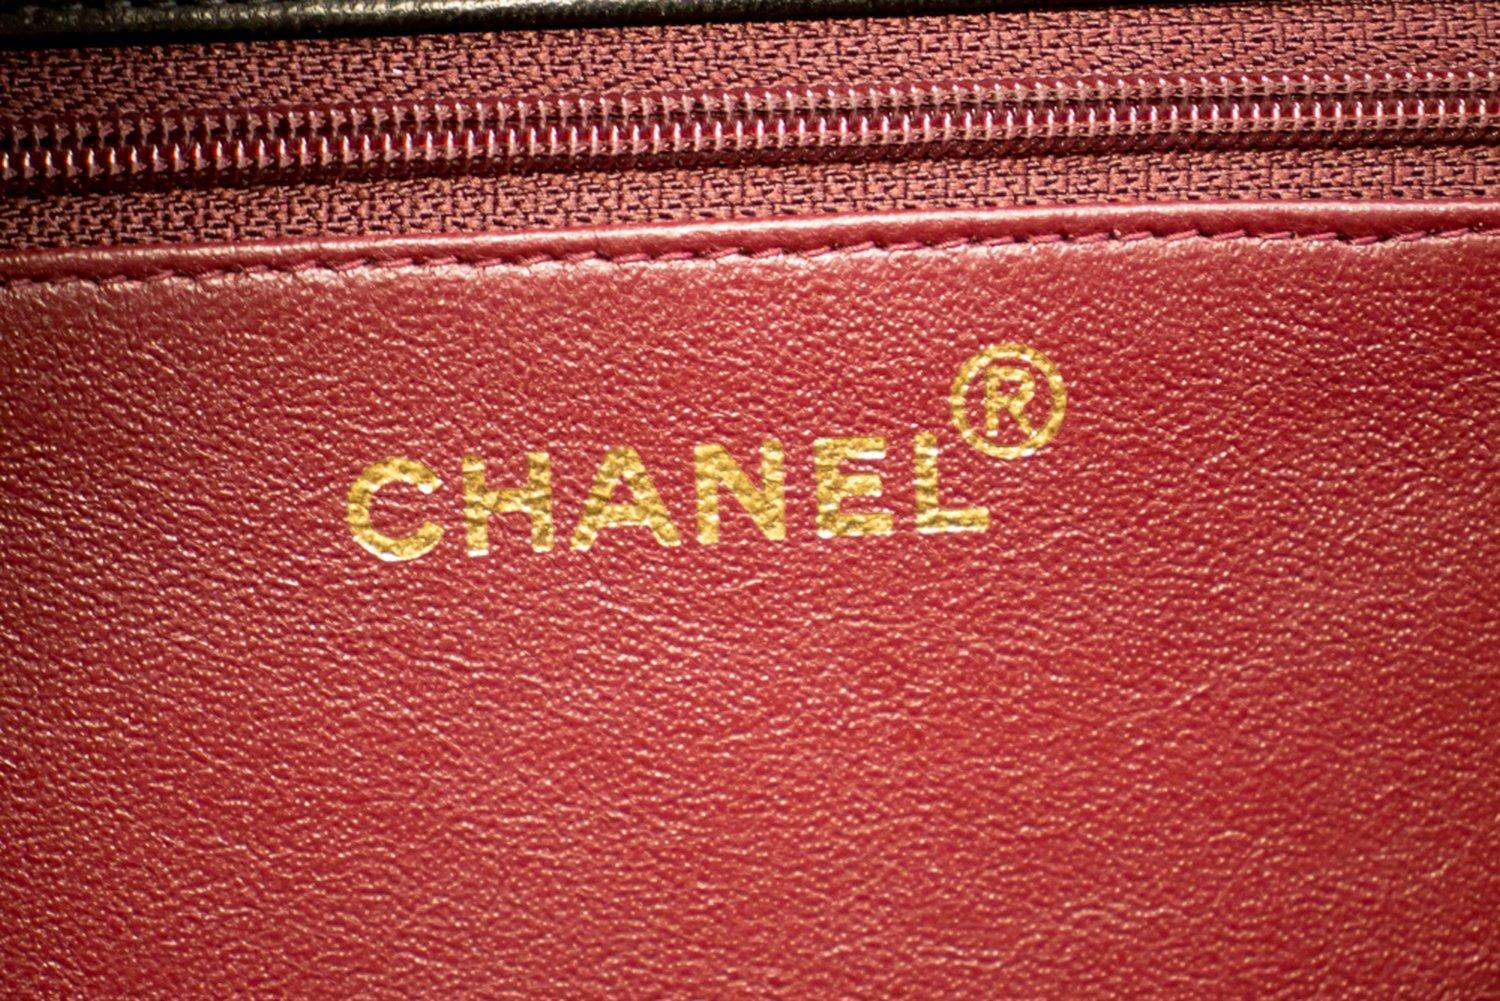 CHANEL Chain Shoulder Bag Black Clutch Flap Quilted Purse Lambskin 9